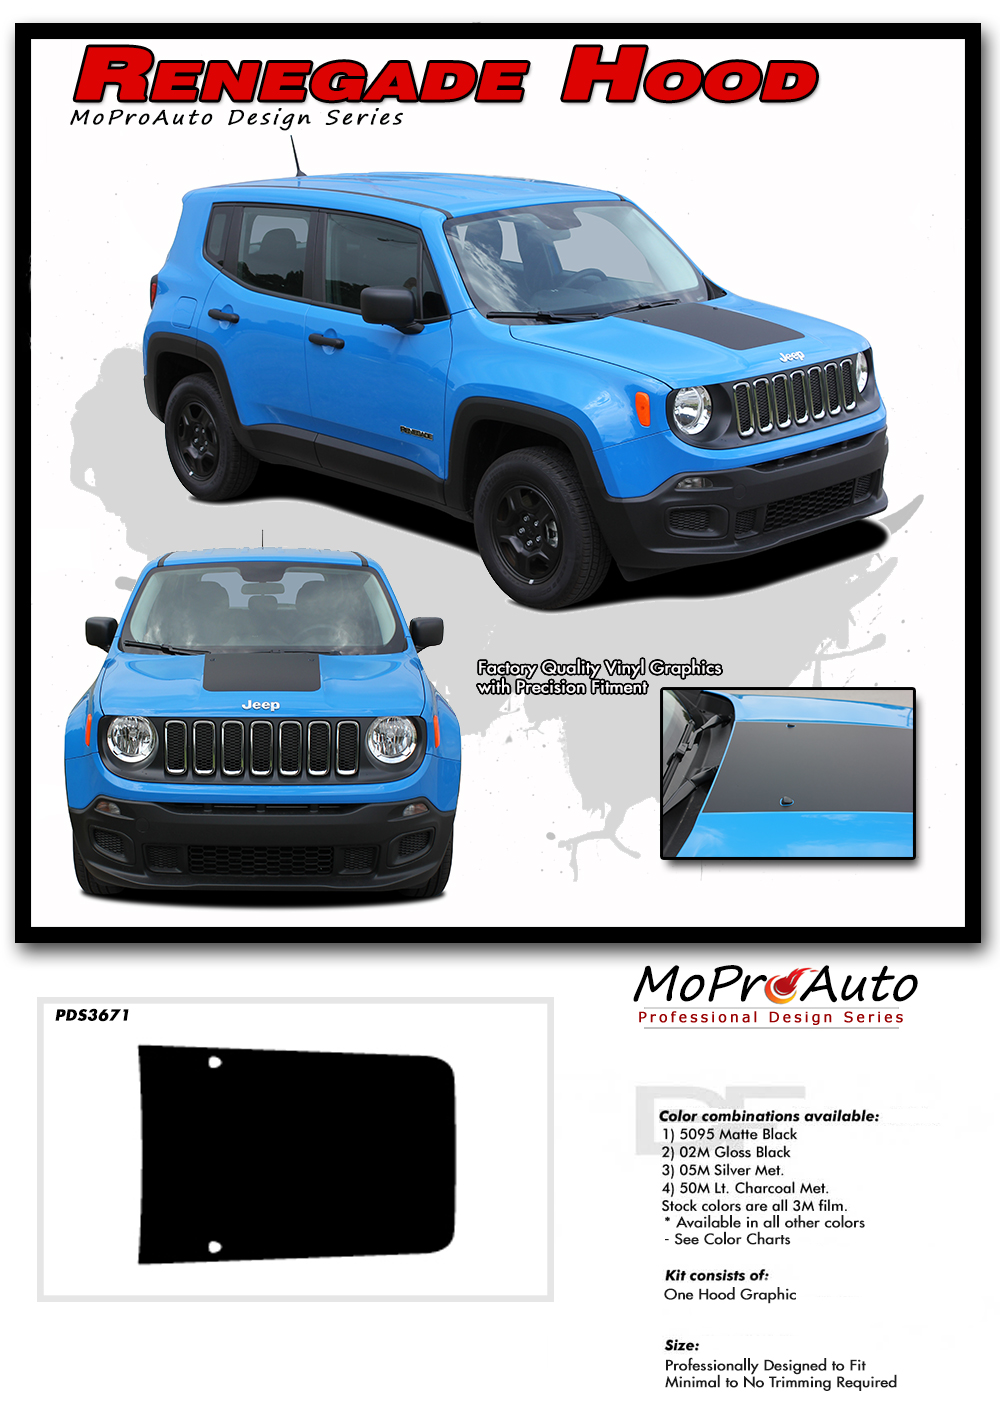 RENEGADE HOOD Jeep Renegade Hood Graphic - MoProAuto Pro Design Series Vinyl Graphics, Stripes and Decals Kit